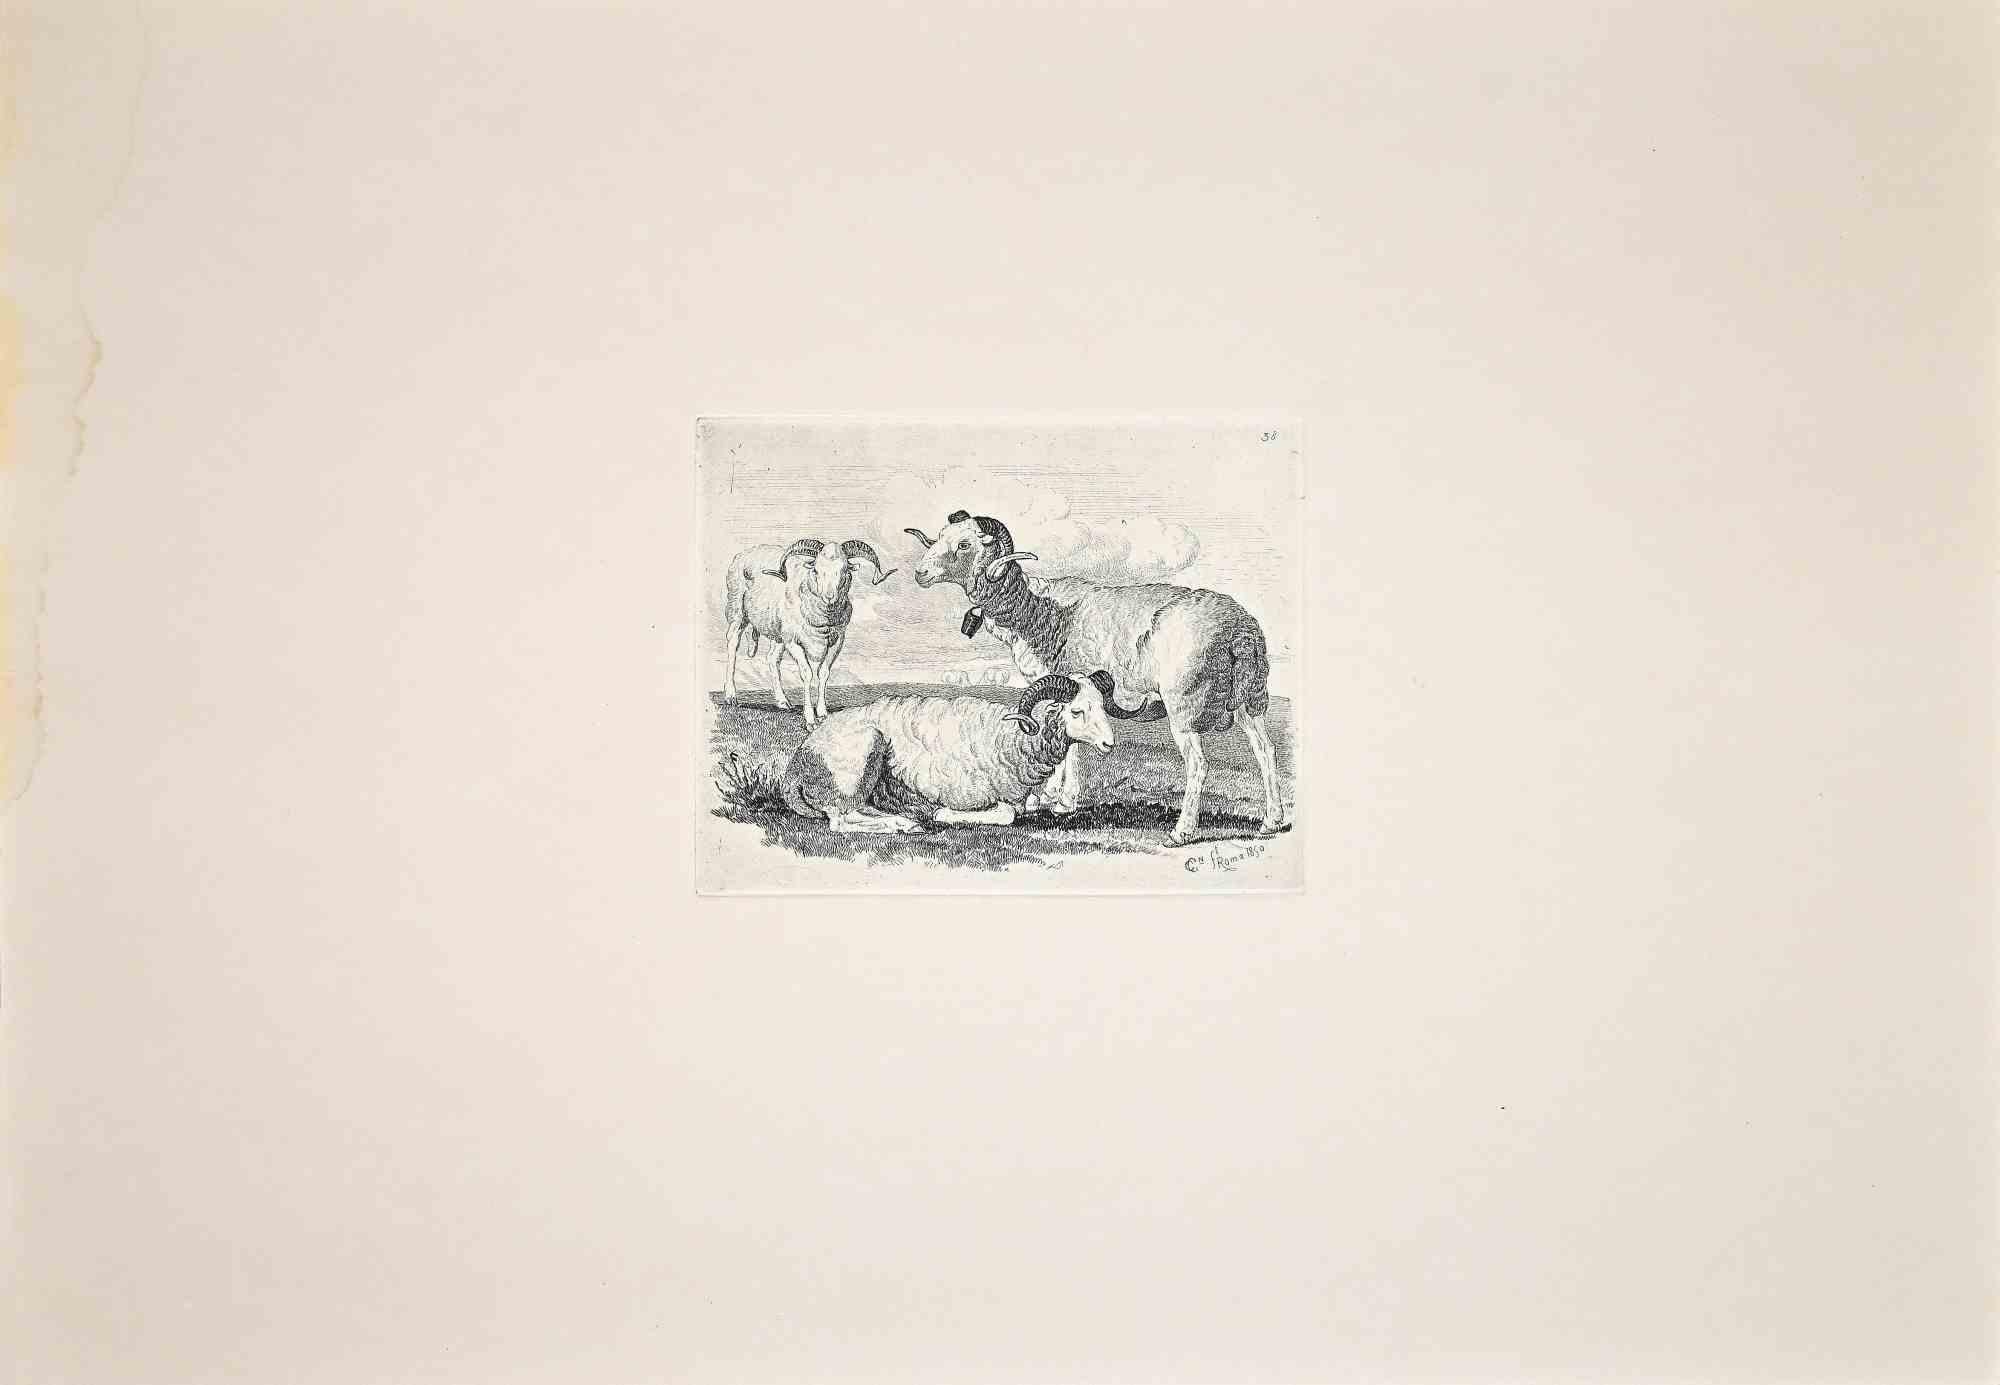 Goats in the Roman Countryside is an original etching artwork realized after Charles Coleman (1807, Yorkshire - 1874, Roma) in 1992.

Signed on the plate, the rare edition of only 25 copies.

Good condition except for a light stain along the left